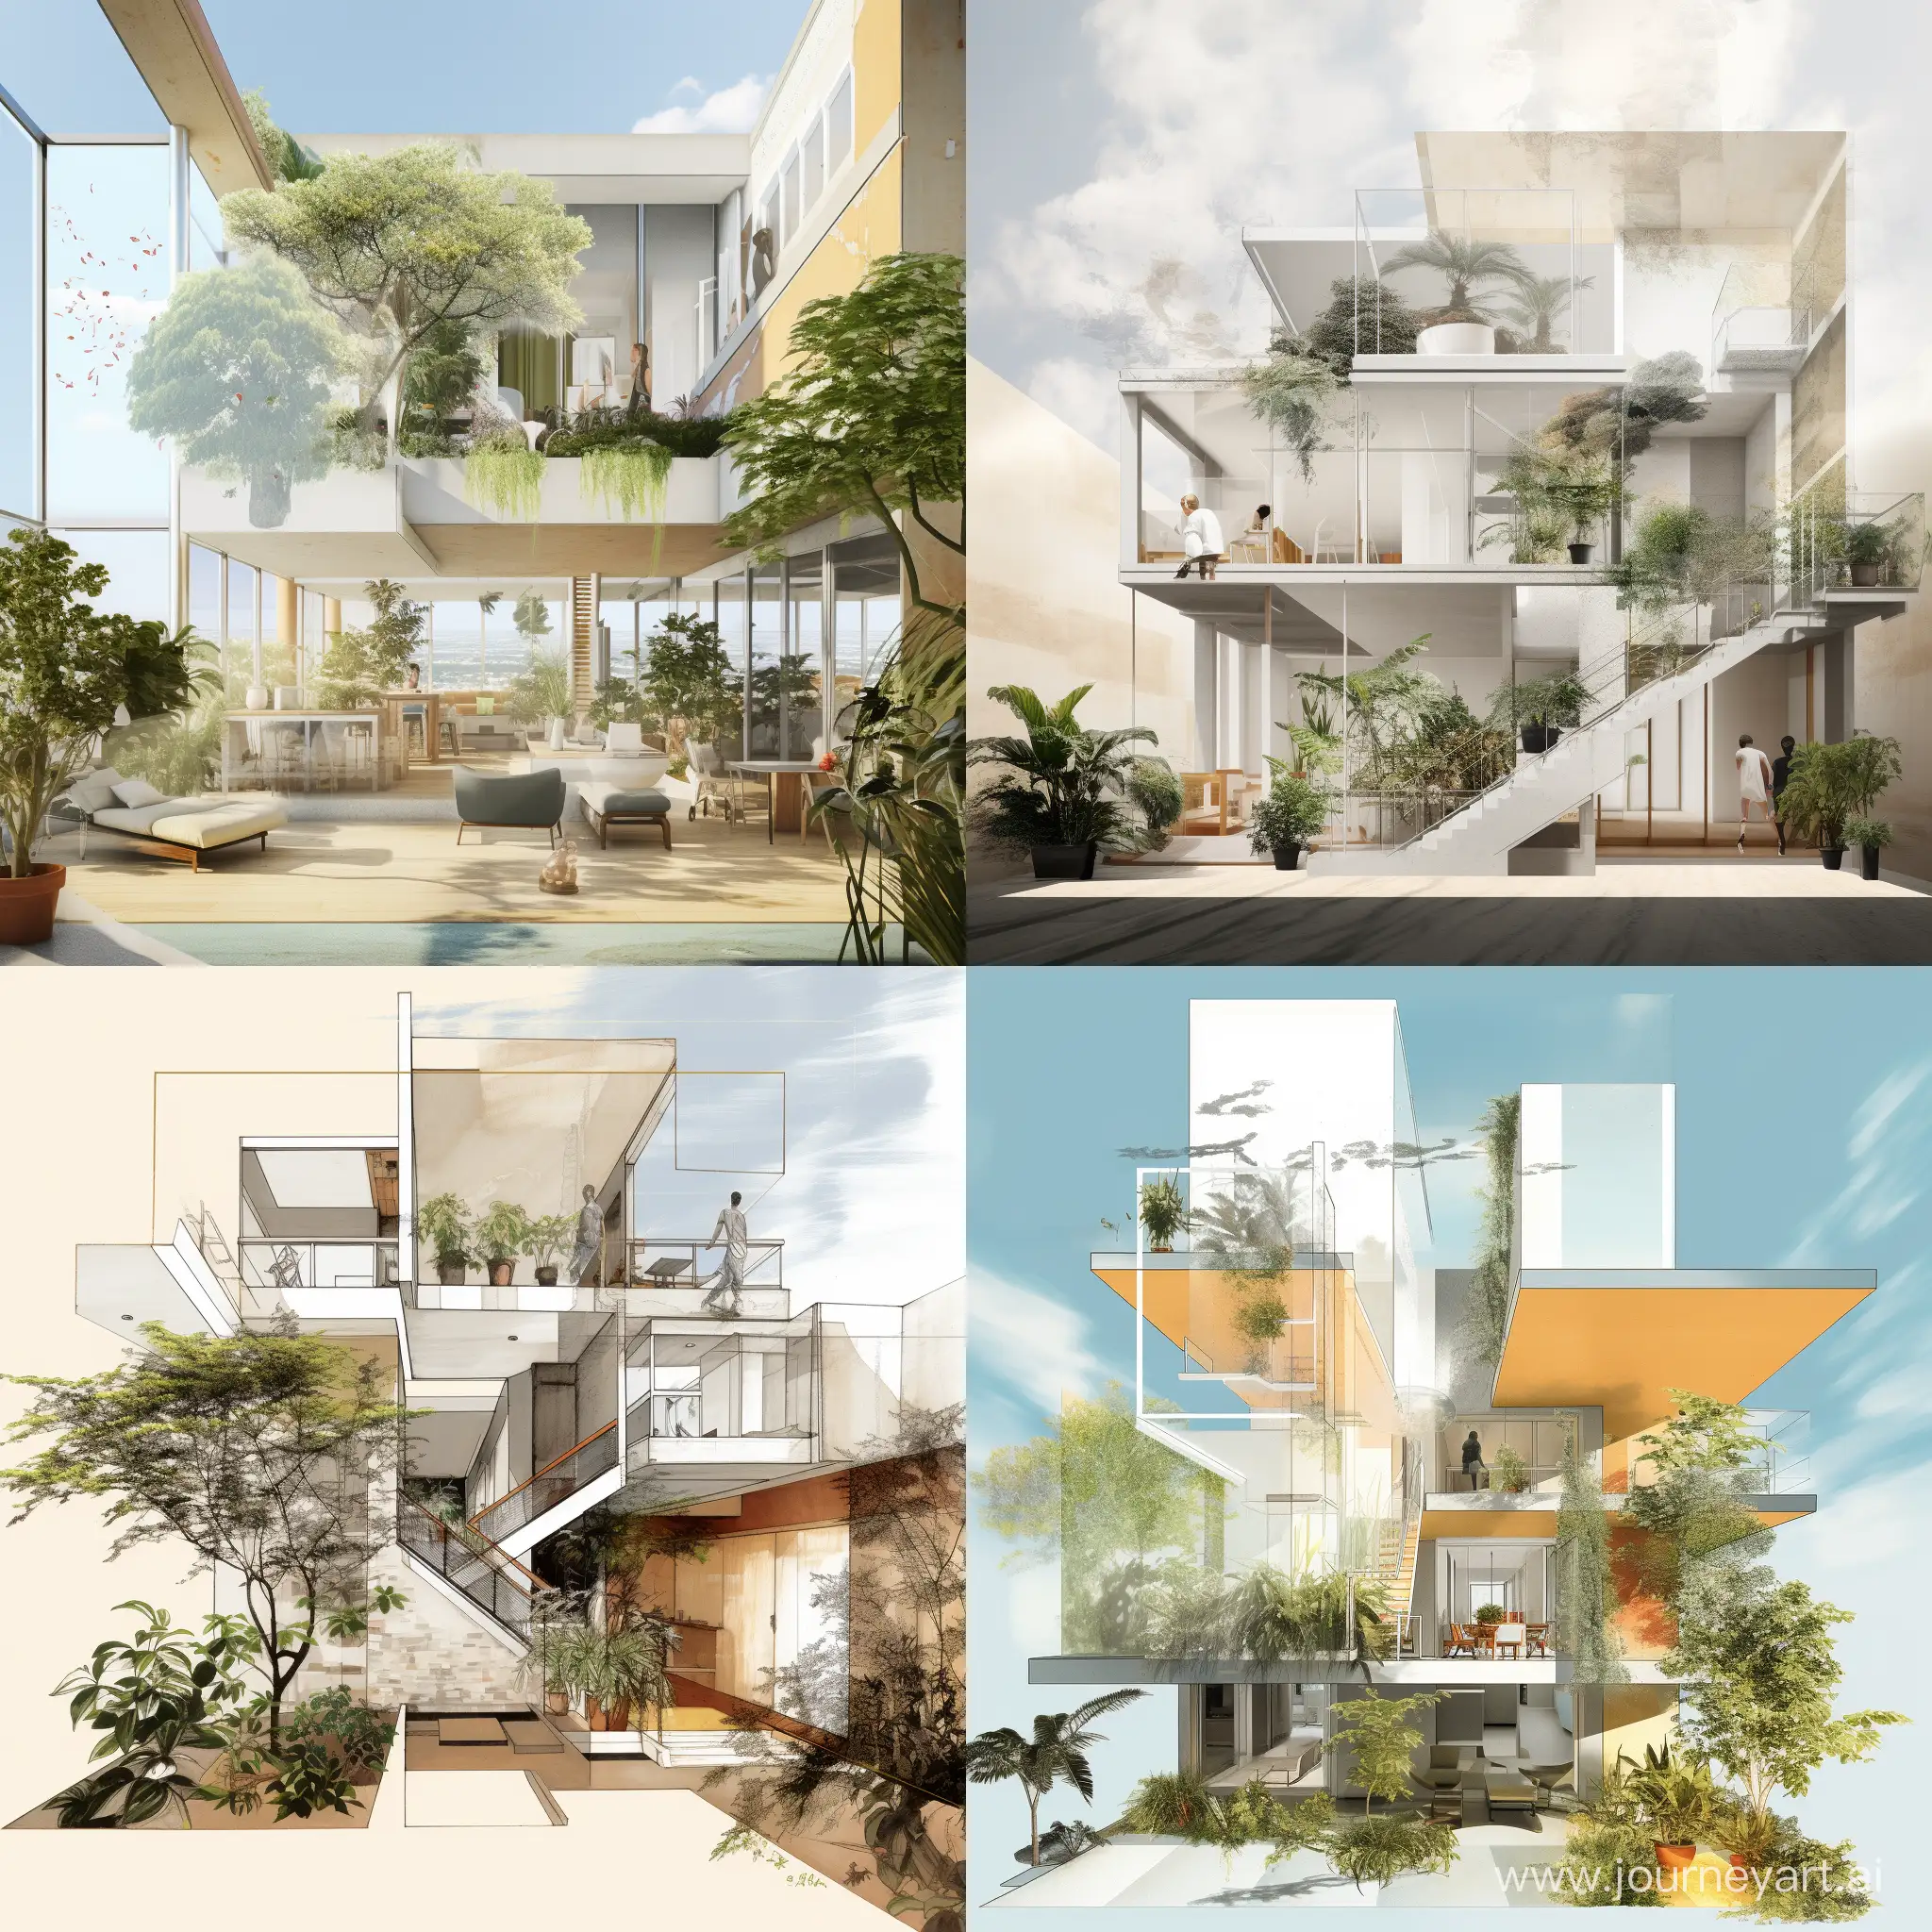 a simple concept collage for a design project with inside outside concept with an open to sky atrium of a four floor building for rehabilitation centre with plants and a safe and healthy hospital
showcasing sketch and collage  